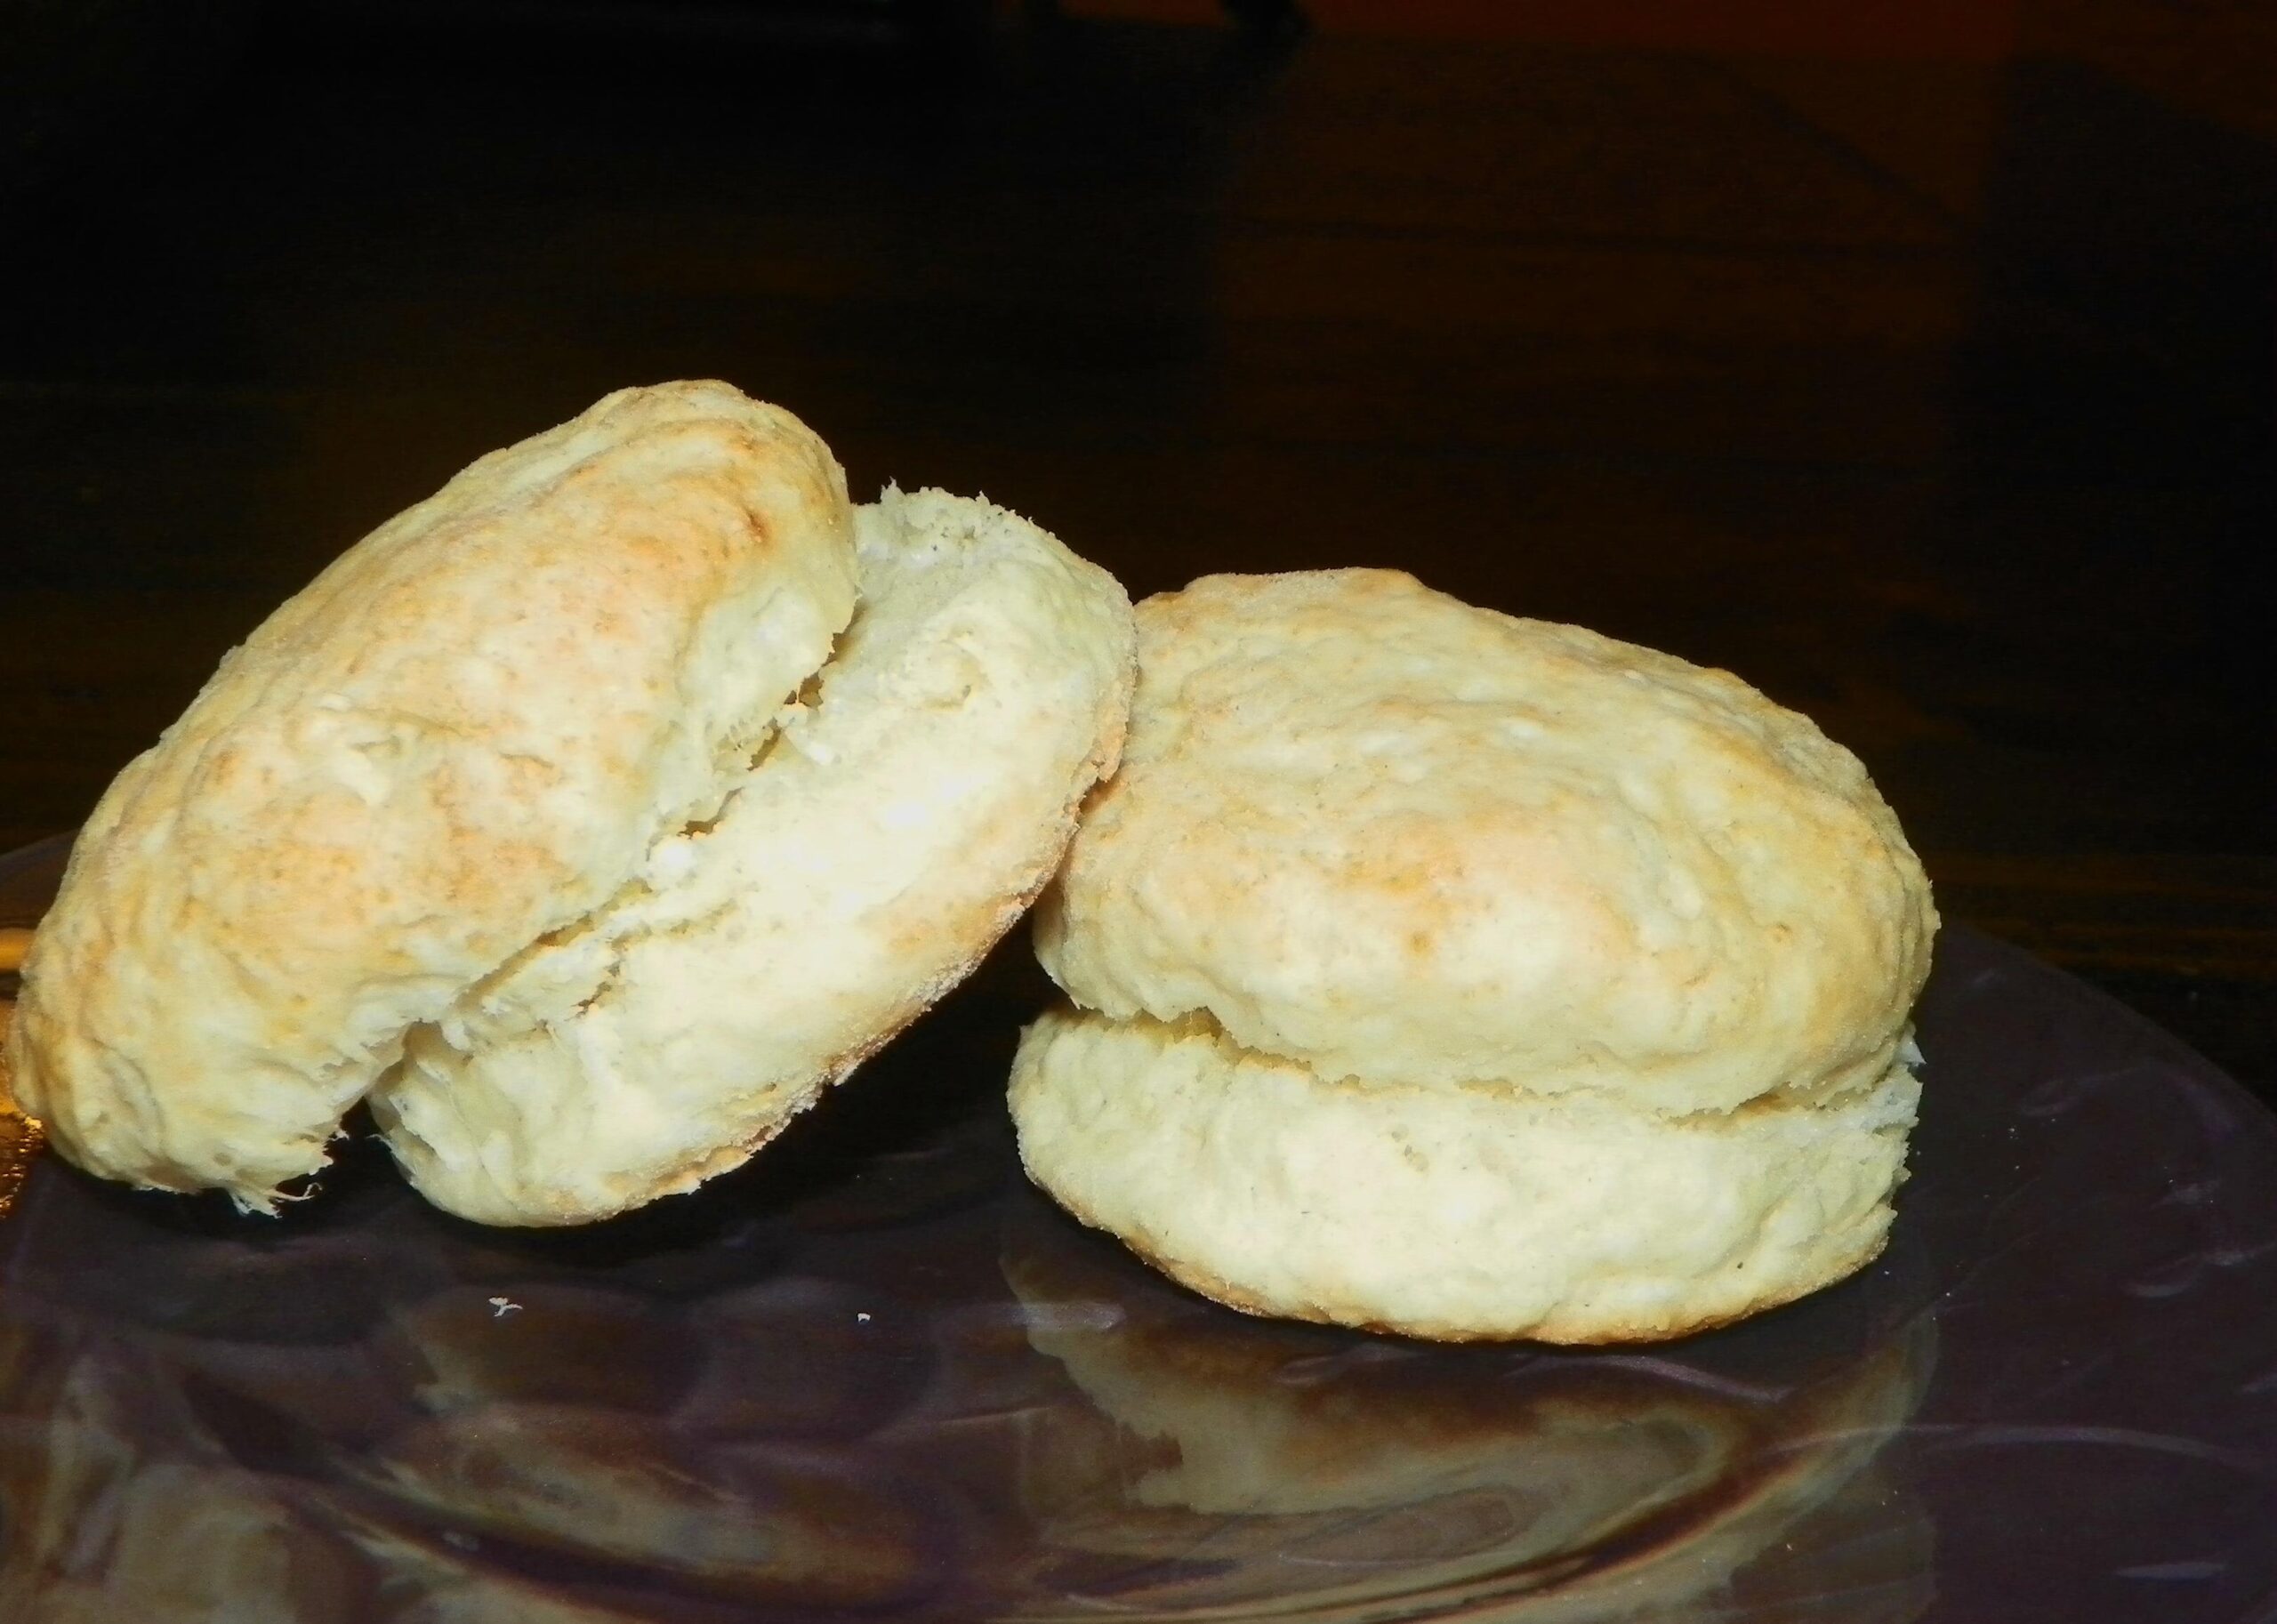  No one can resist the aroma of fresh baked biscuits!